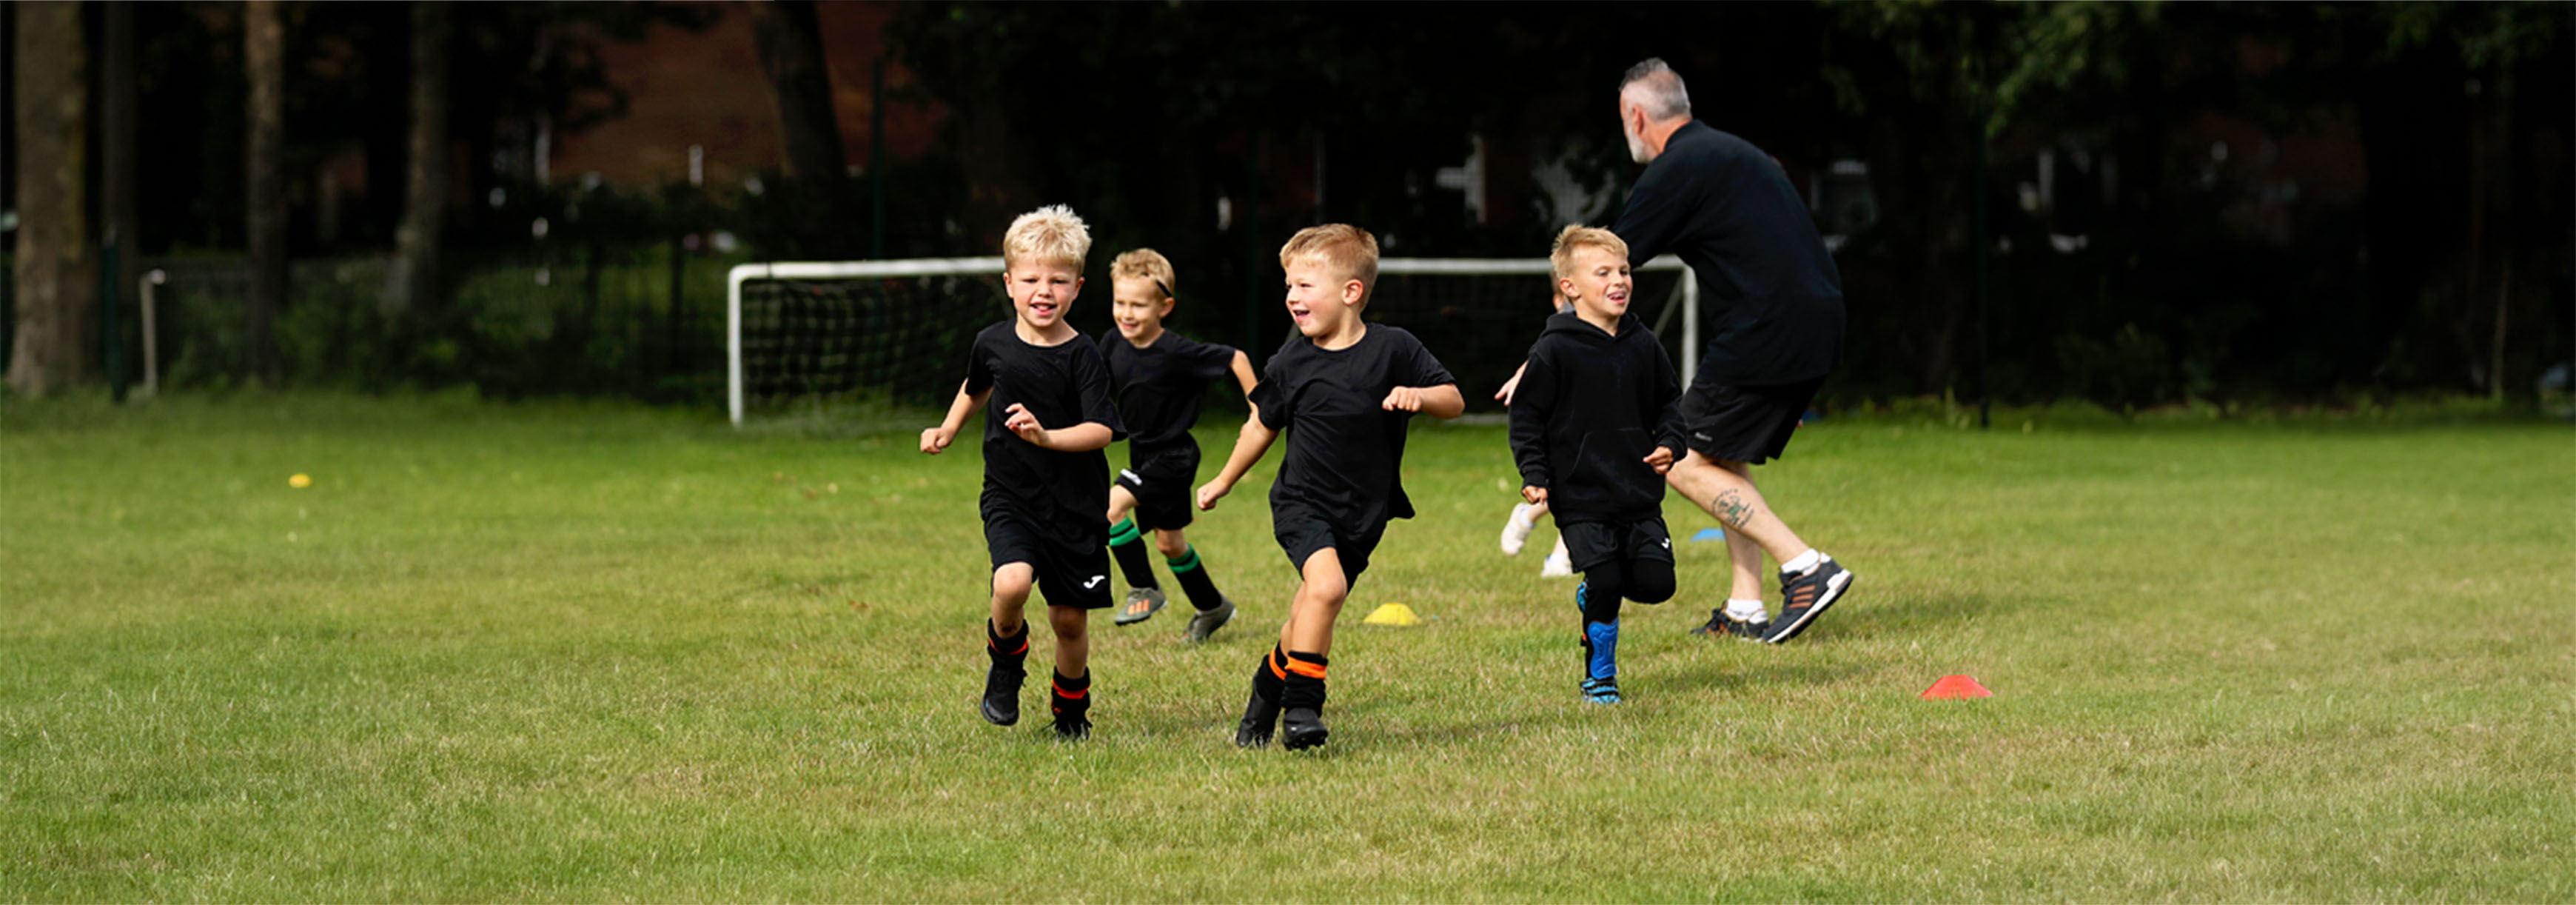 A group of young players aged four to six run around on a grass pitch playing tag.